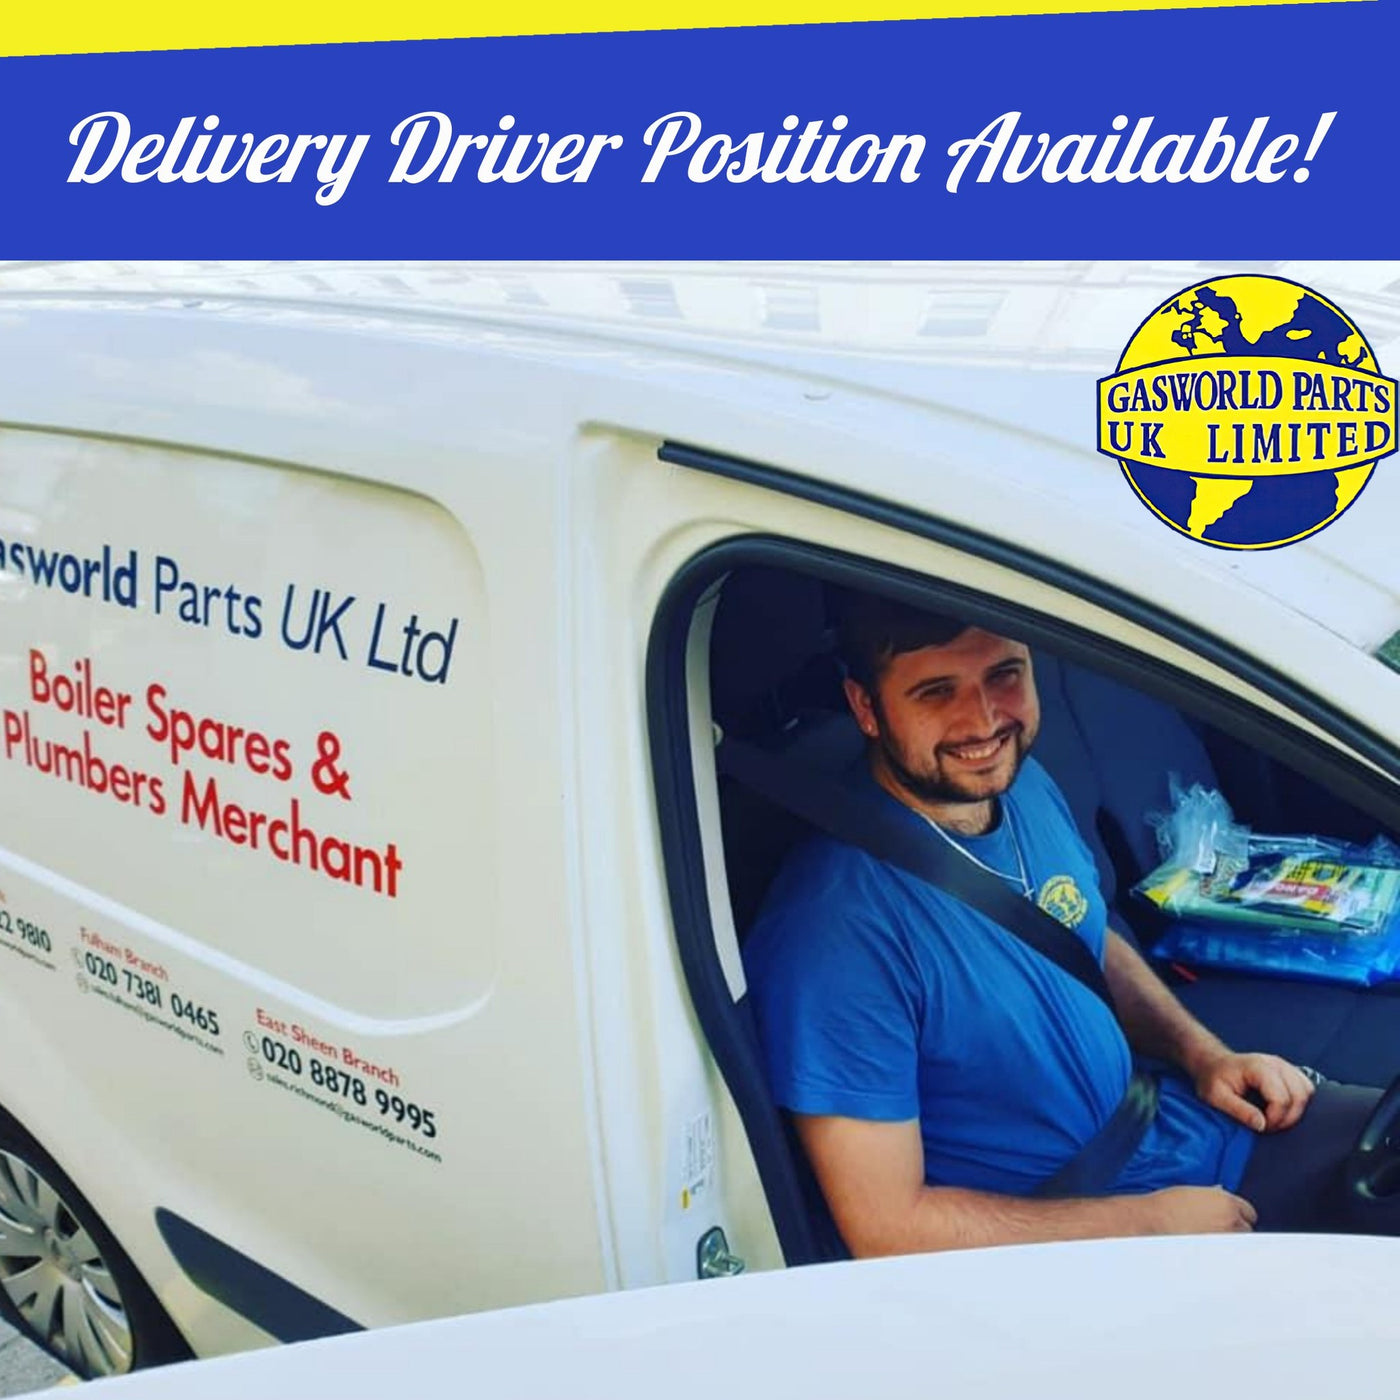 Delivery Driver Position Available!